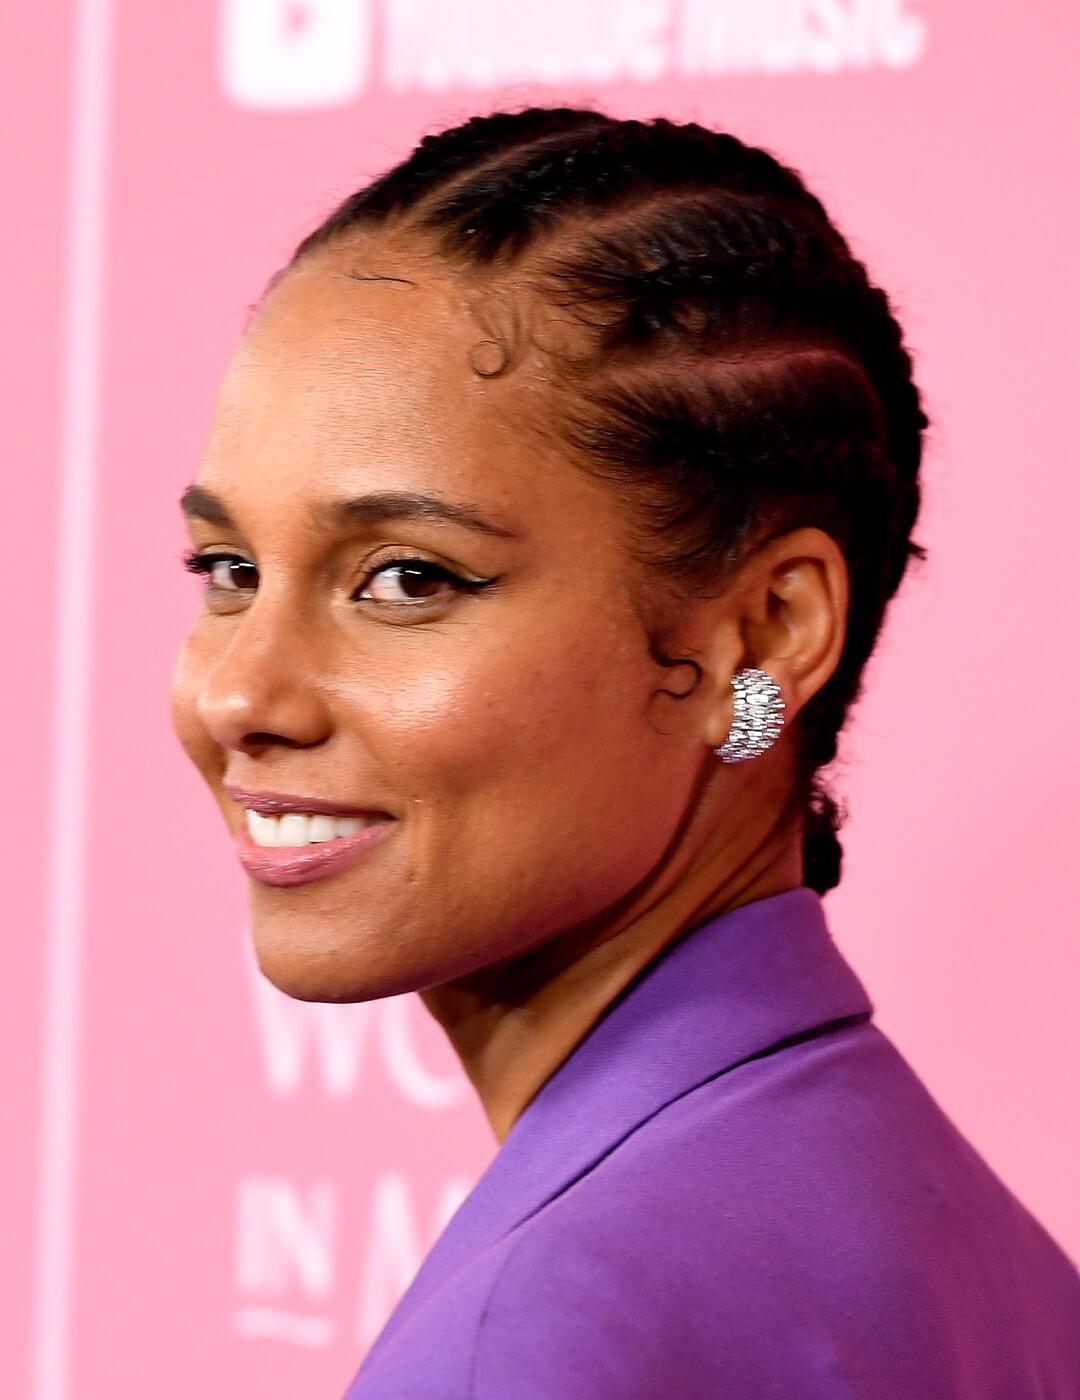 Alicia Keys looking chic in a purple suit, diamond-studded earrings, and cornrow braided hairstyle